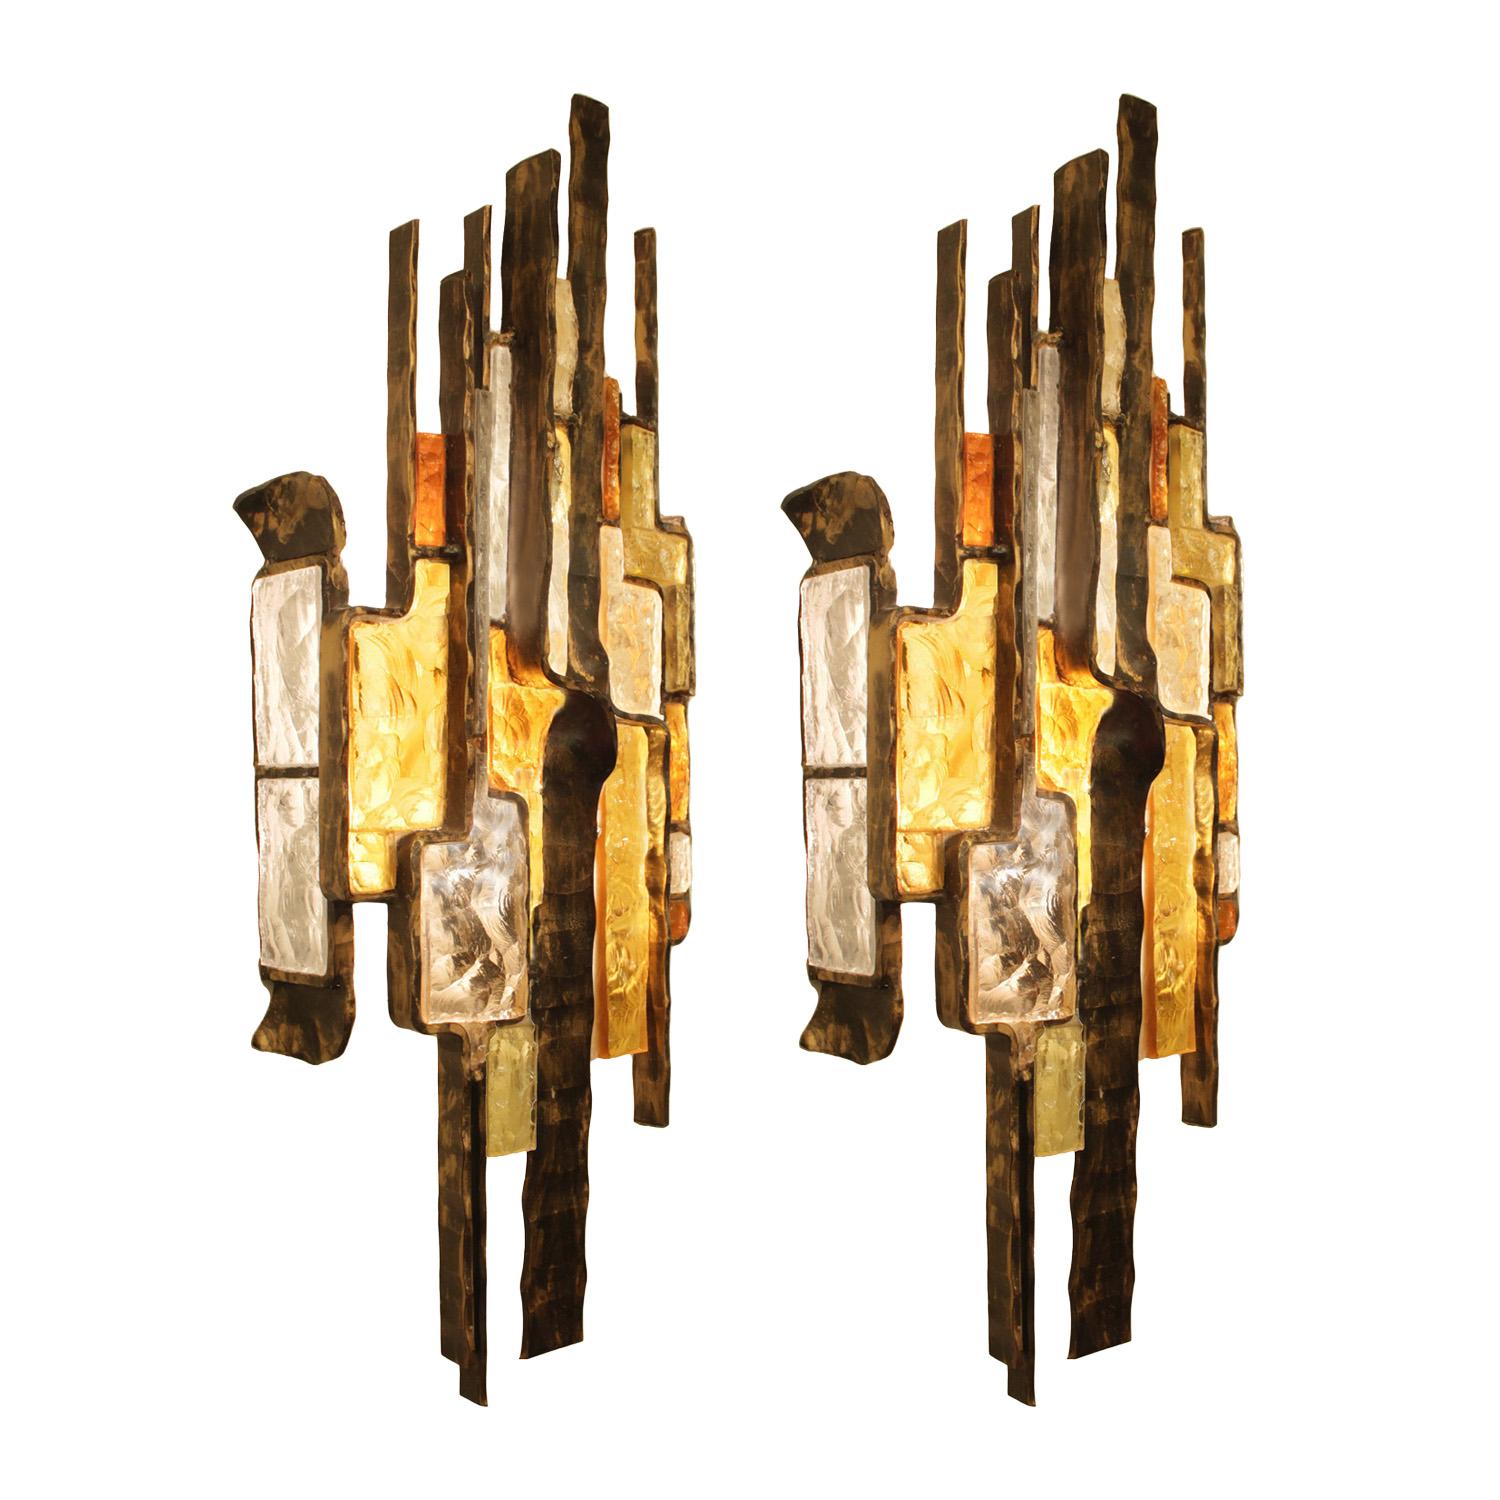 Pair of Brutalist style Murano glass and iron sconces with inset, irregular shaped amber, smoke and clear art glass arranged in an abstract pattern. Designed by Alberto Poli for Poliarte. Italy, 1960's.